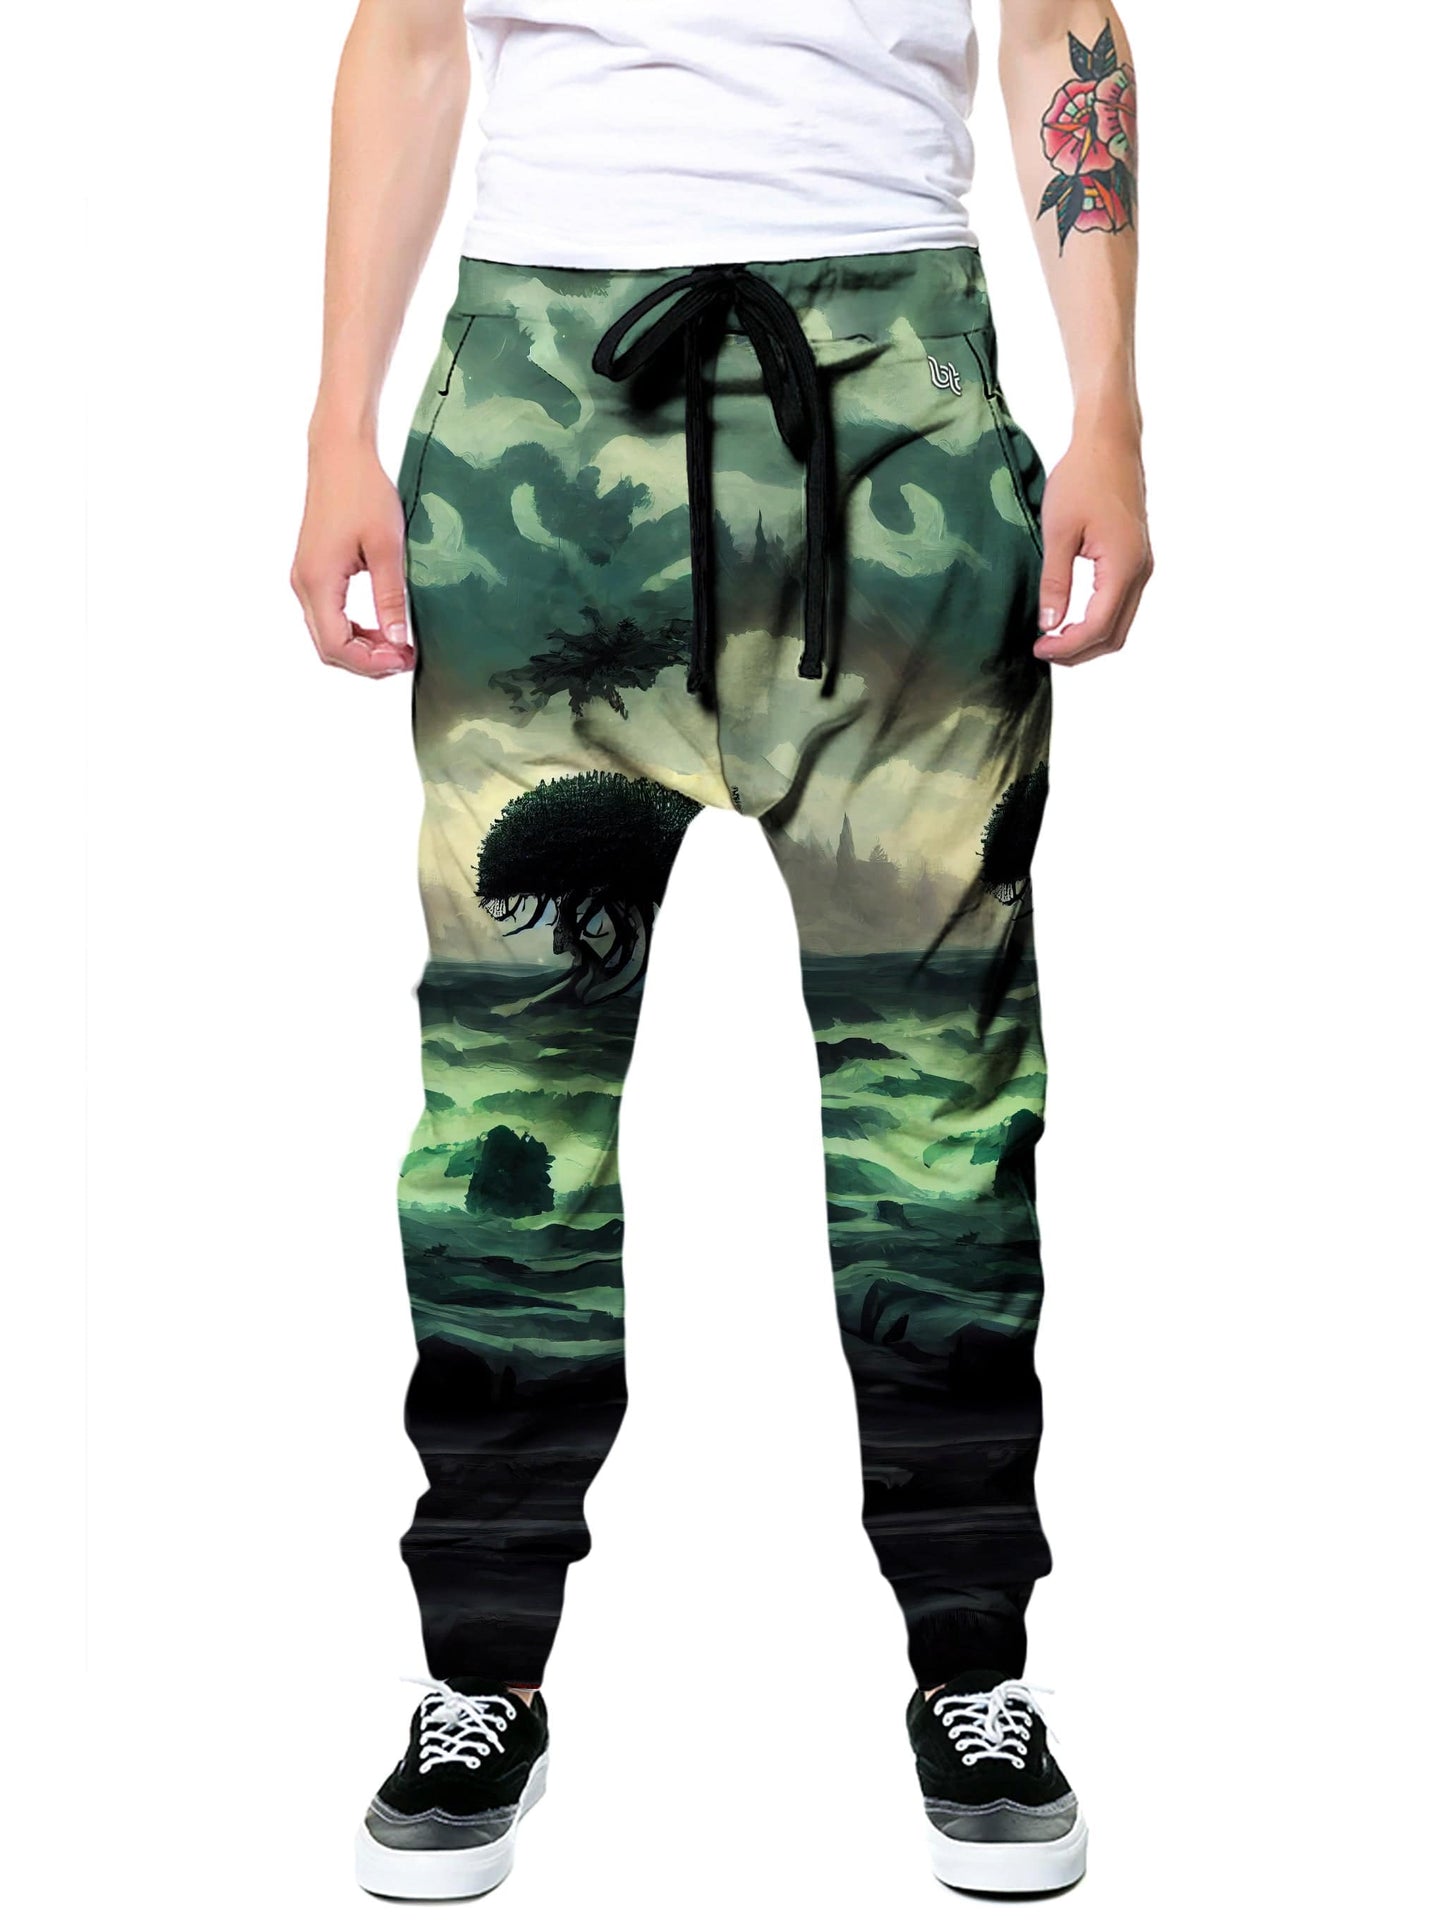 Obsequious Direction Joggers, Gratefully Dyed, | iEDM